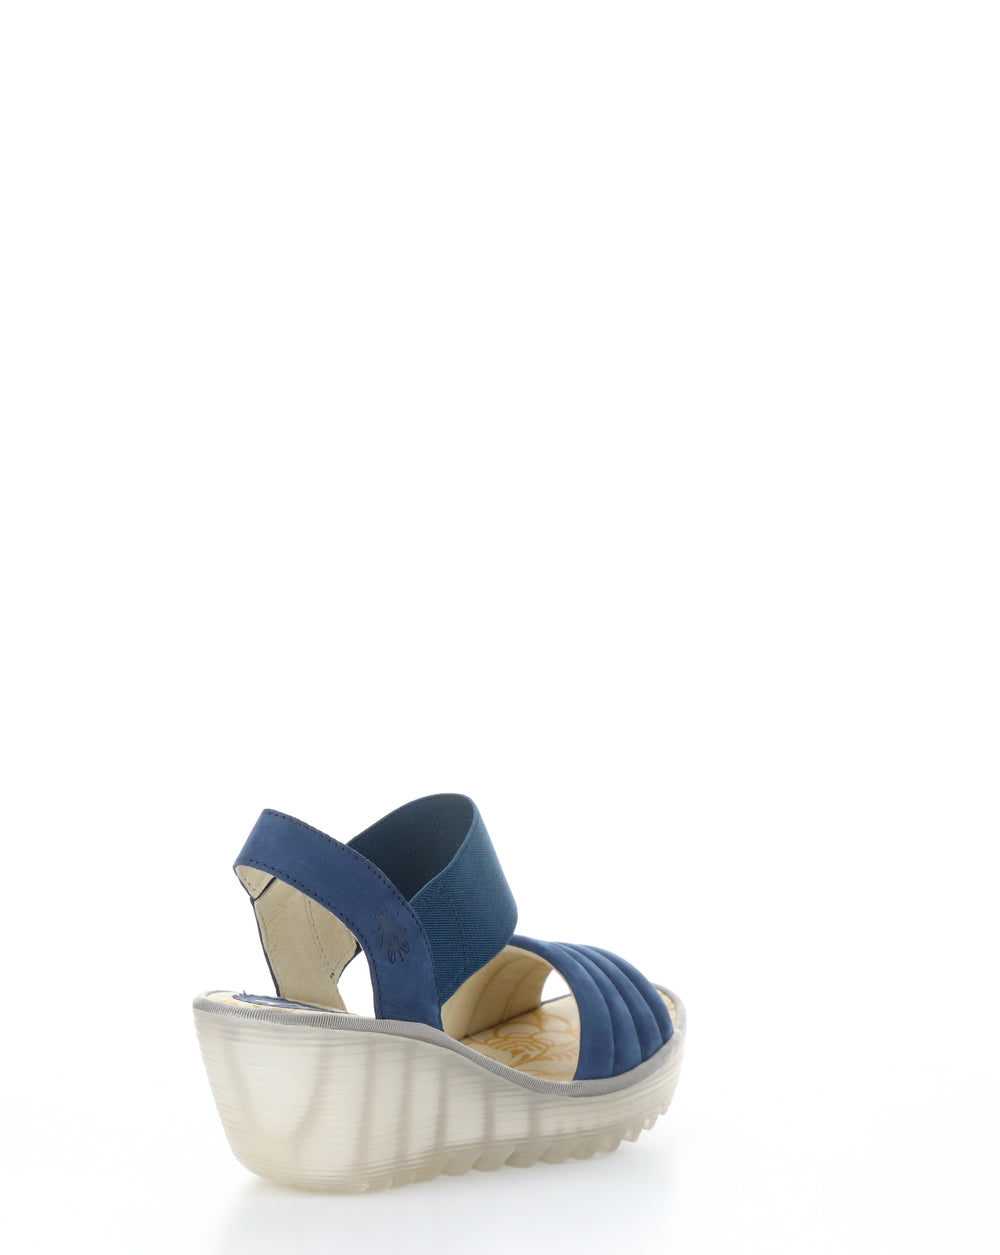 YIKO414FLY 002 BLUE Elasticated Sandals